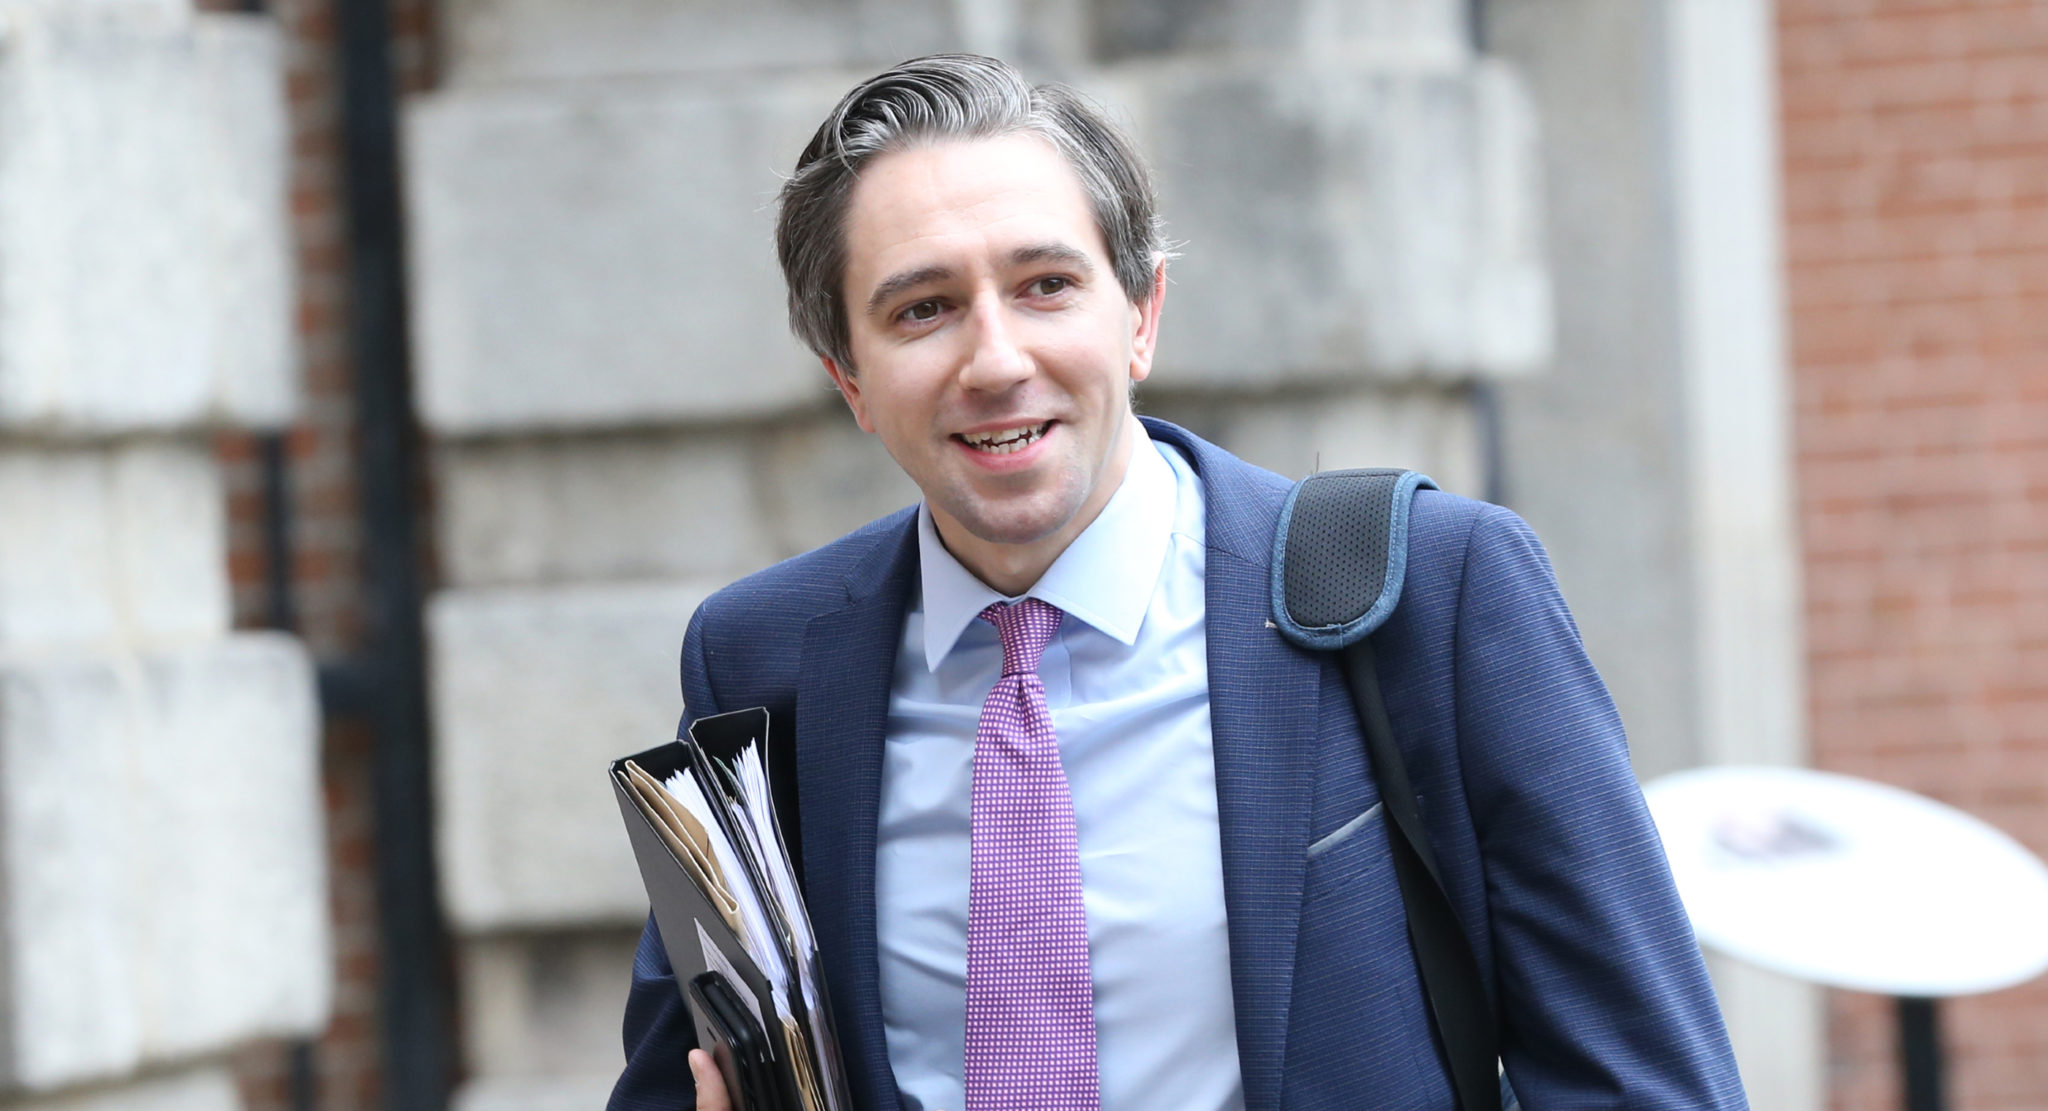 The Minister for Further and Higher Education Simon Harris arriving at Cabinet in Dublin Castle, 01-09-2020. Image: Sasko Lazarov/RollingNews